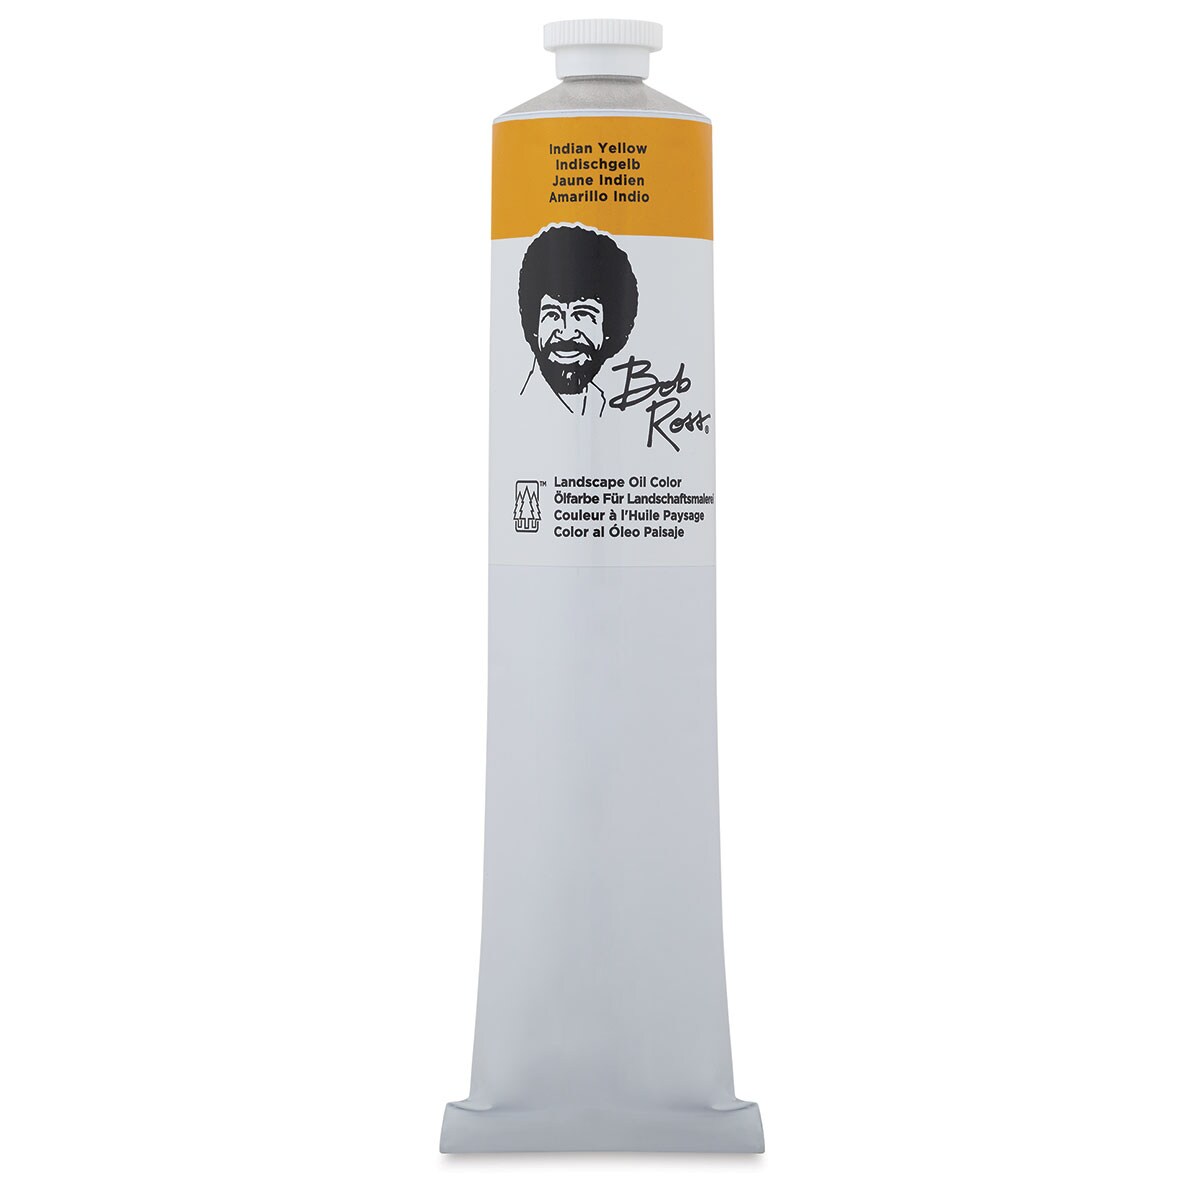 Bob Ross Oil Color - Indian Yellow, 6.8 oz tube